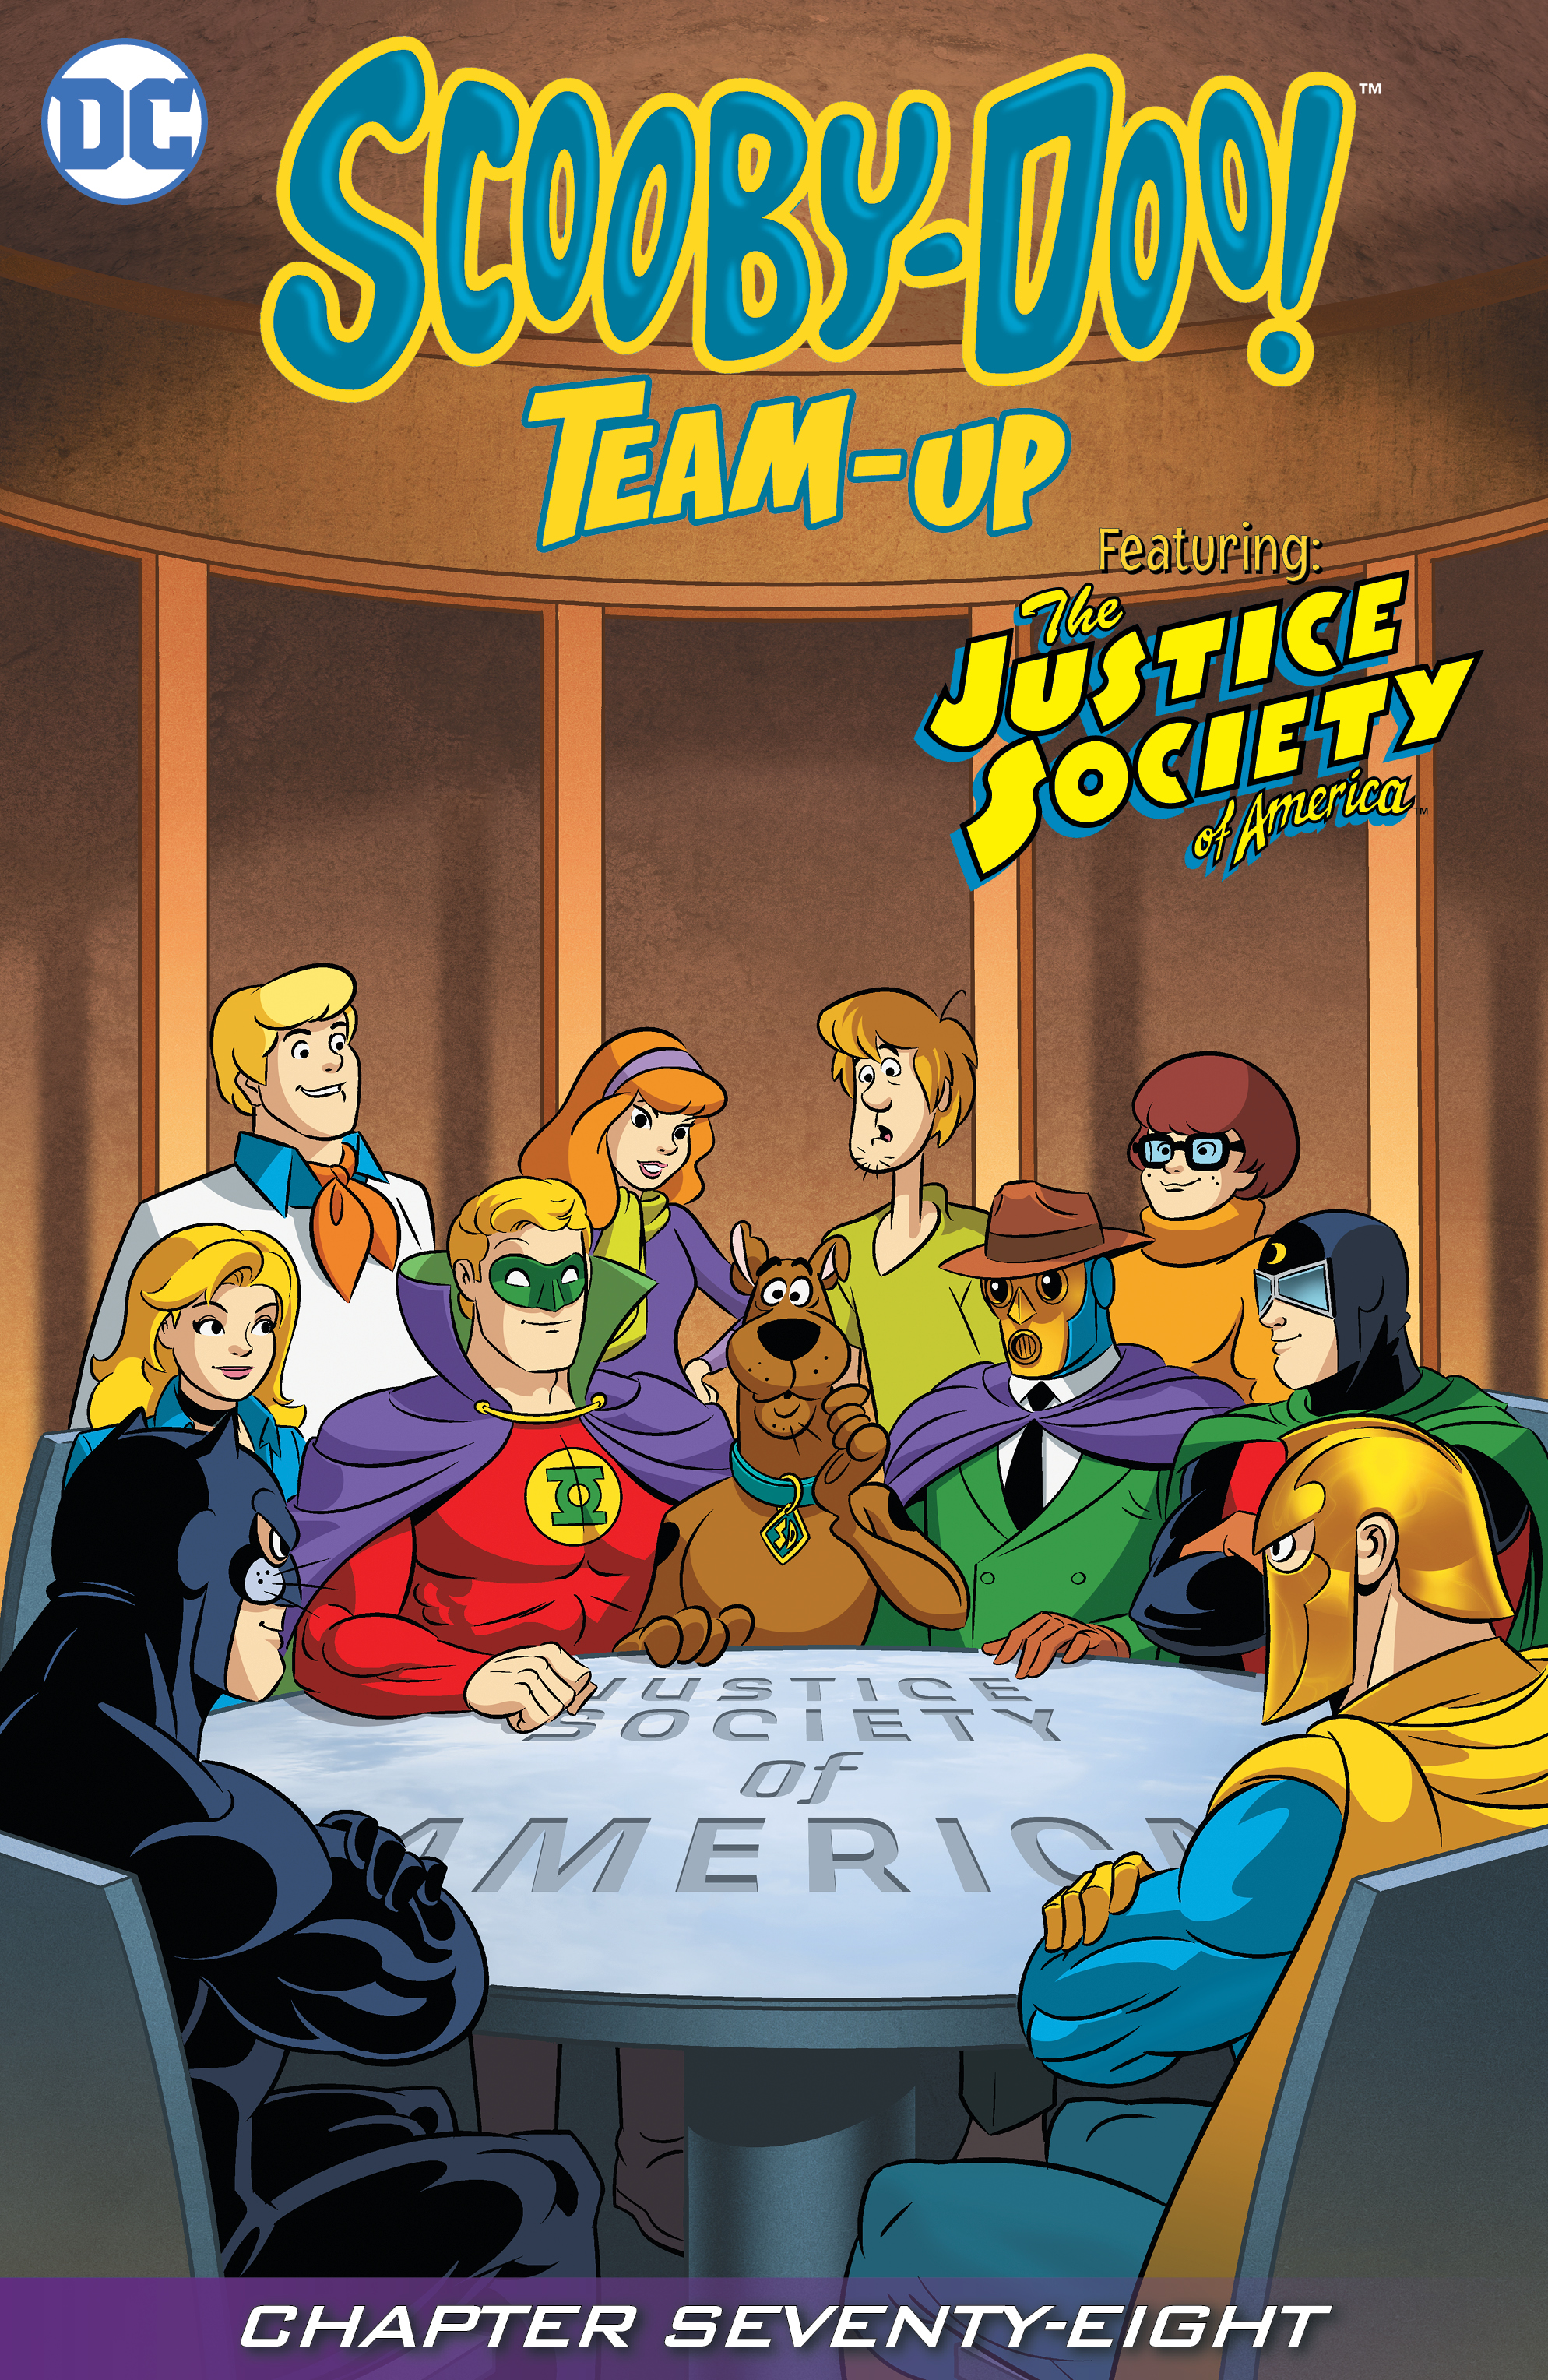 Scooby-Doo Team-Up #78 preview images